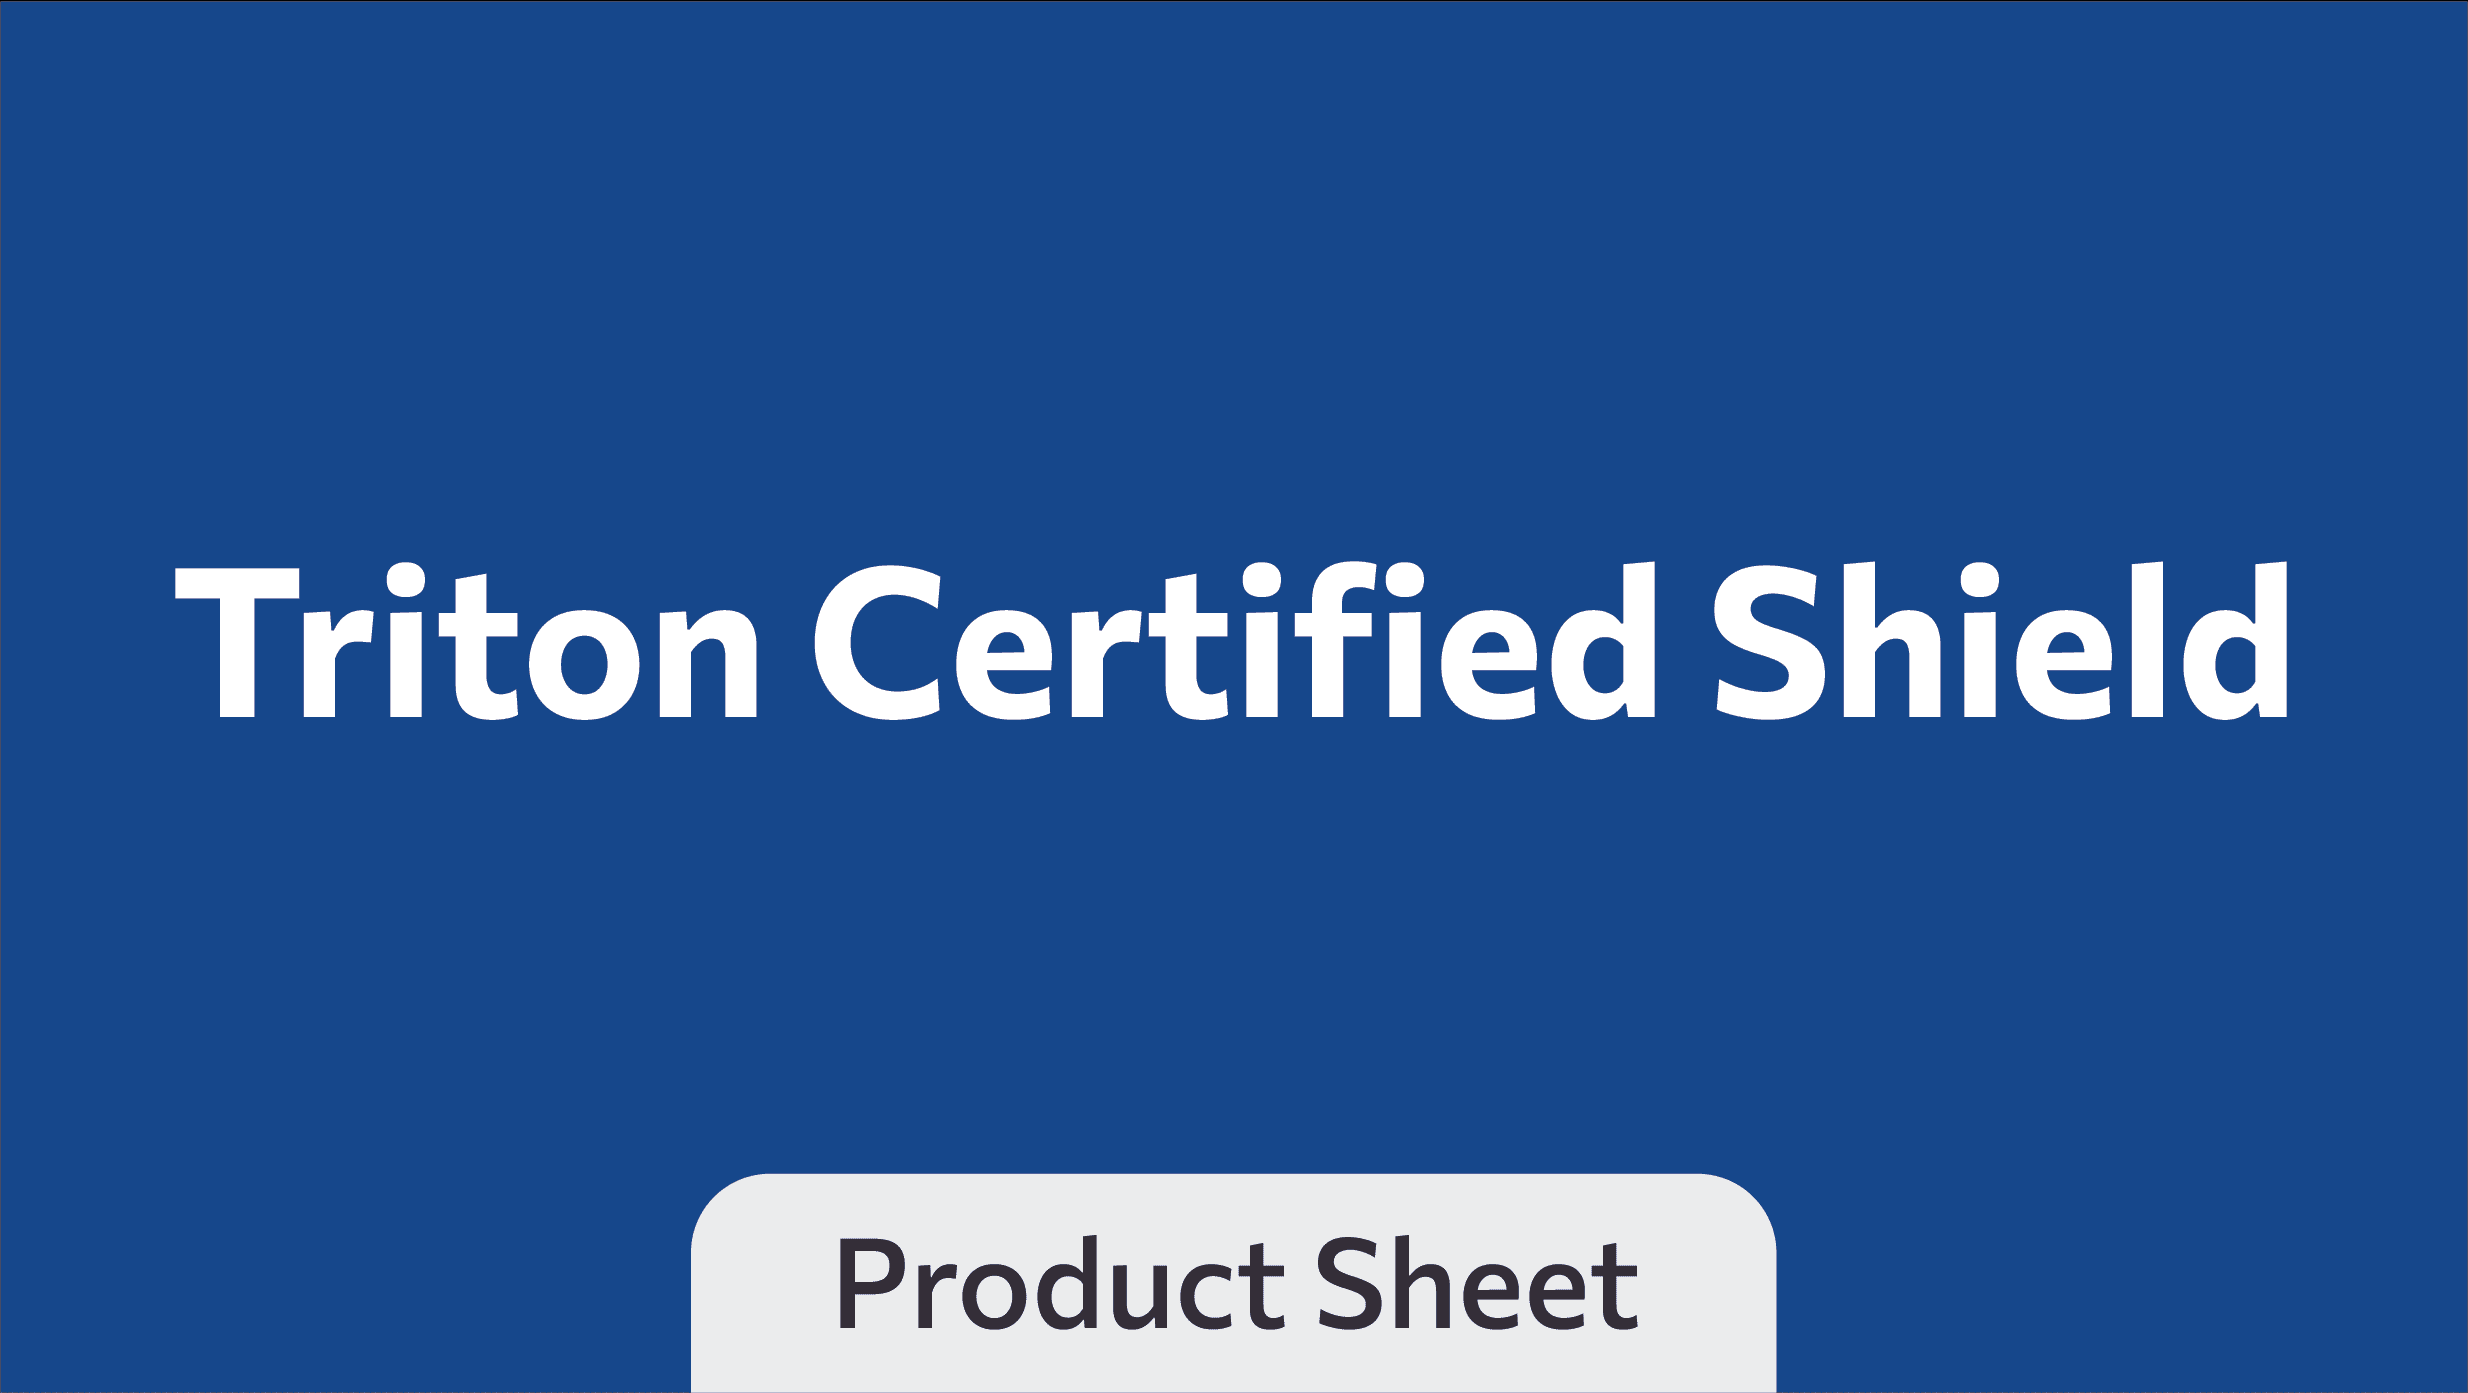 TritonCertifiedShield